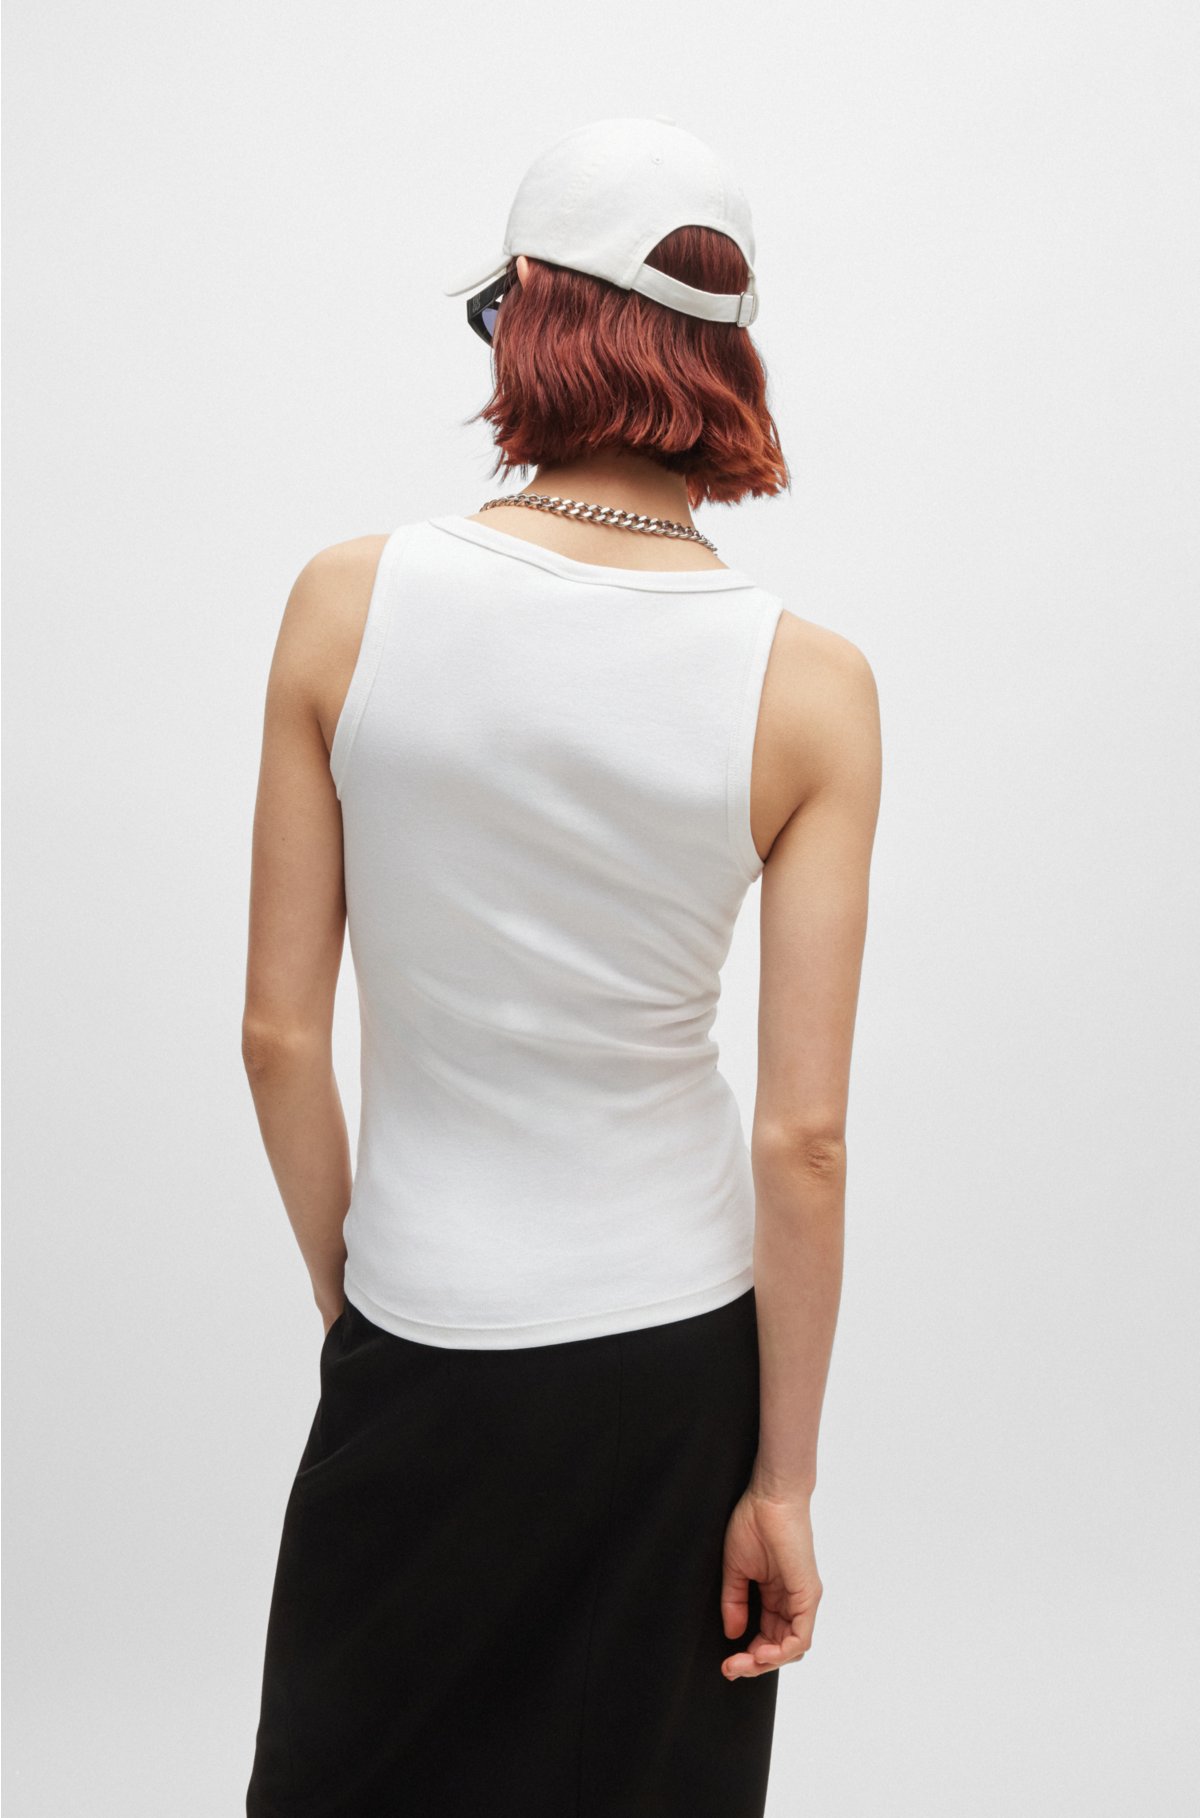 HUGO - Cotton-blend tank top with stacked logo